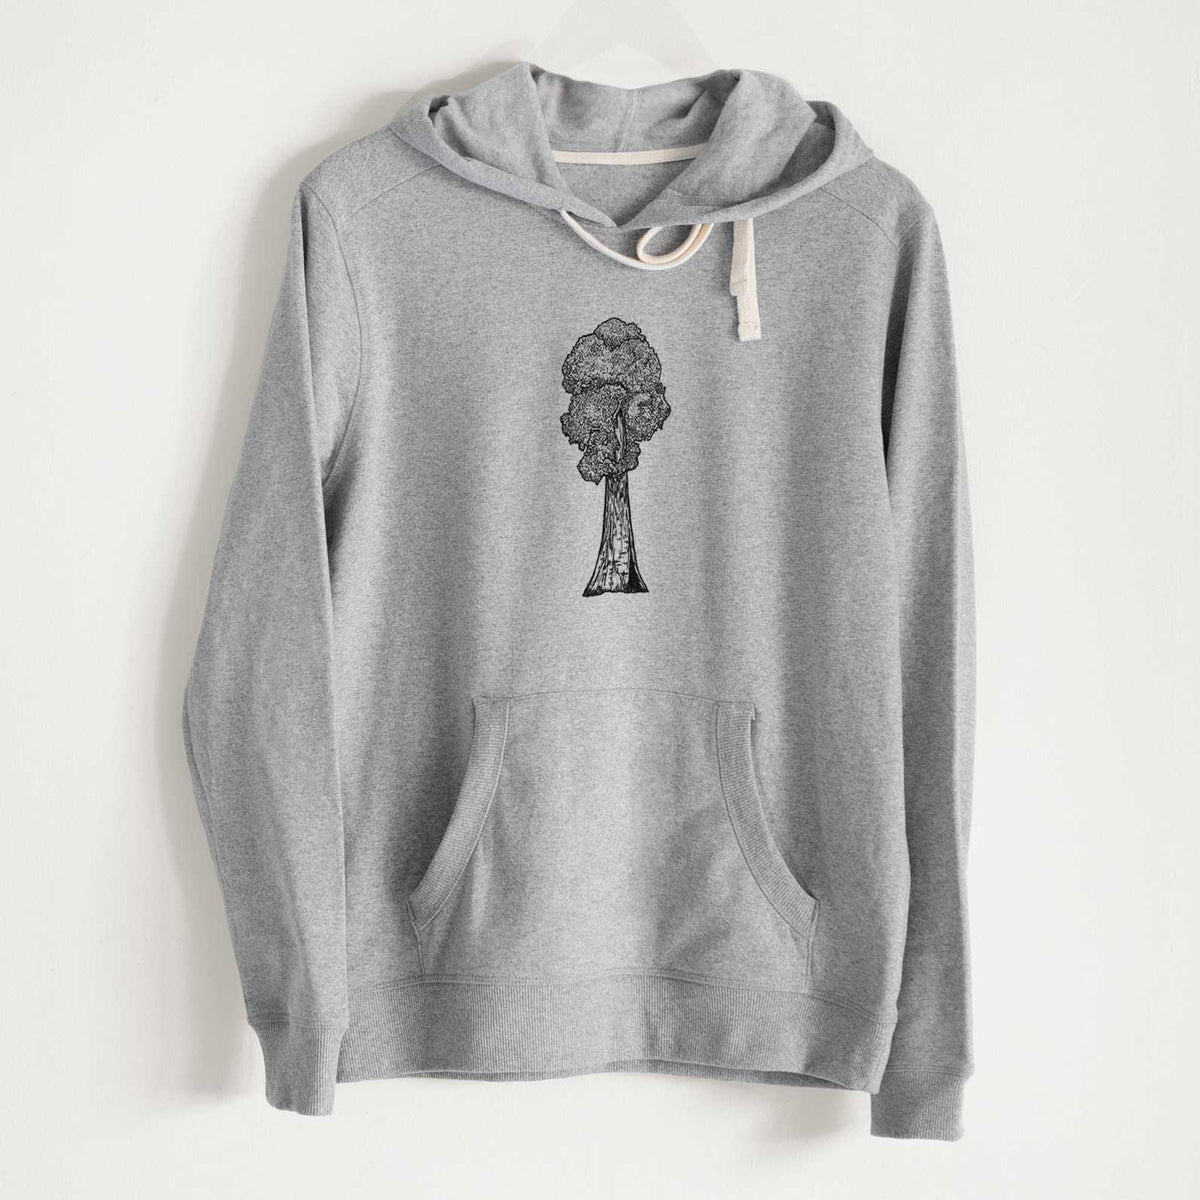 Sequoia - Unisex Recycled Hoodie - CLOSEOUT - FINAL SALE